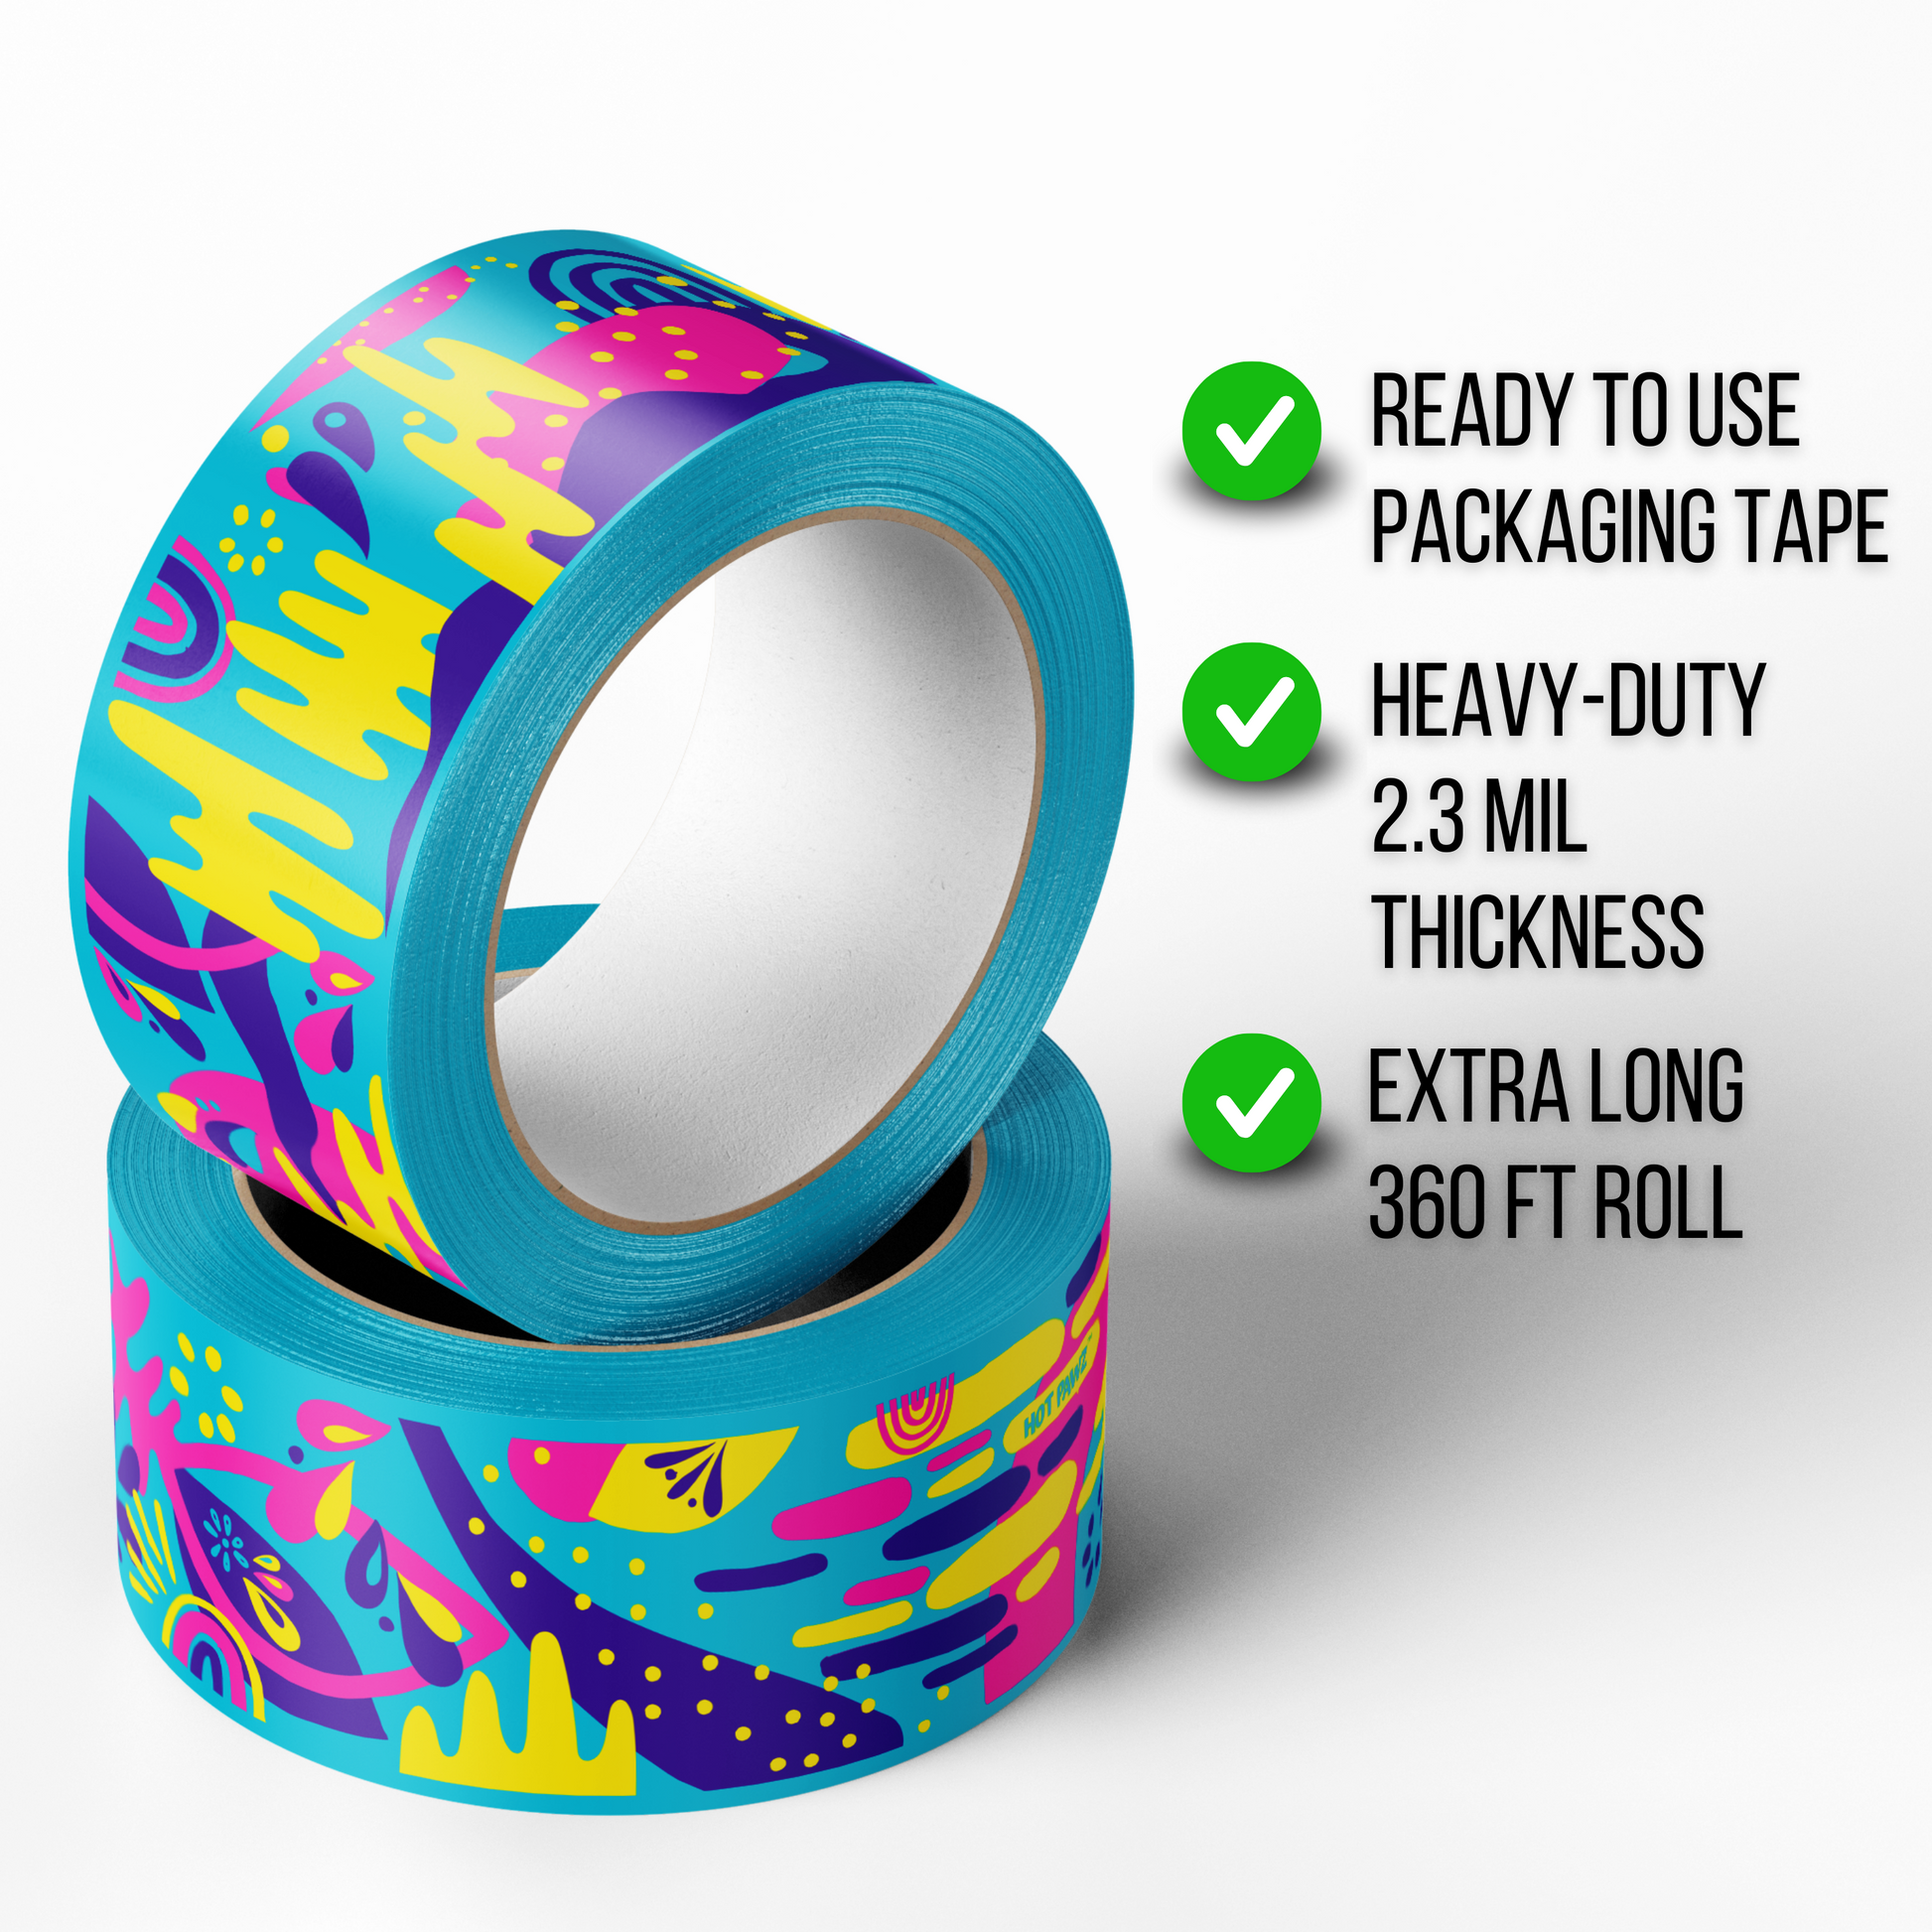 Hot Pawz Packing Tape, Acrylic Colorful Abstract, 50 mm x 120 yd, 2.3 Mil Heavy Duty, 1 Roll